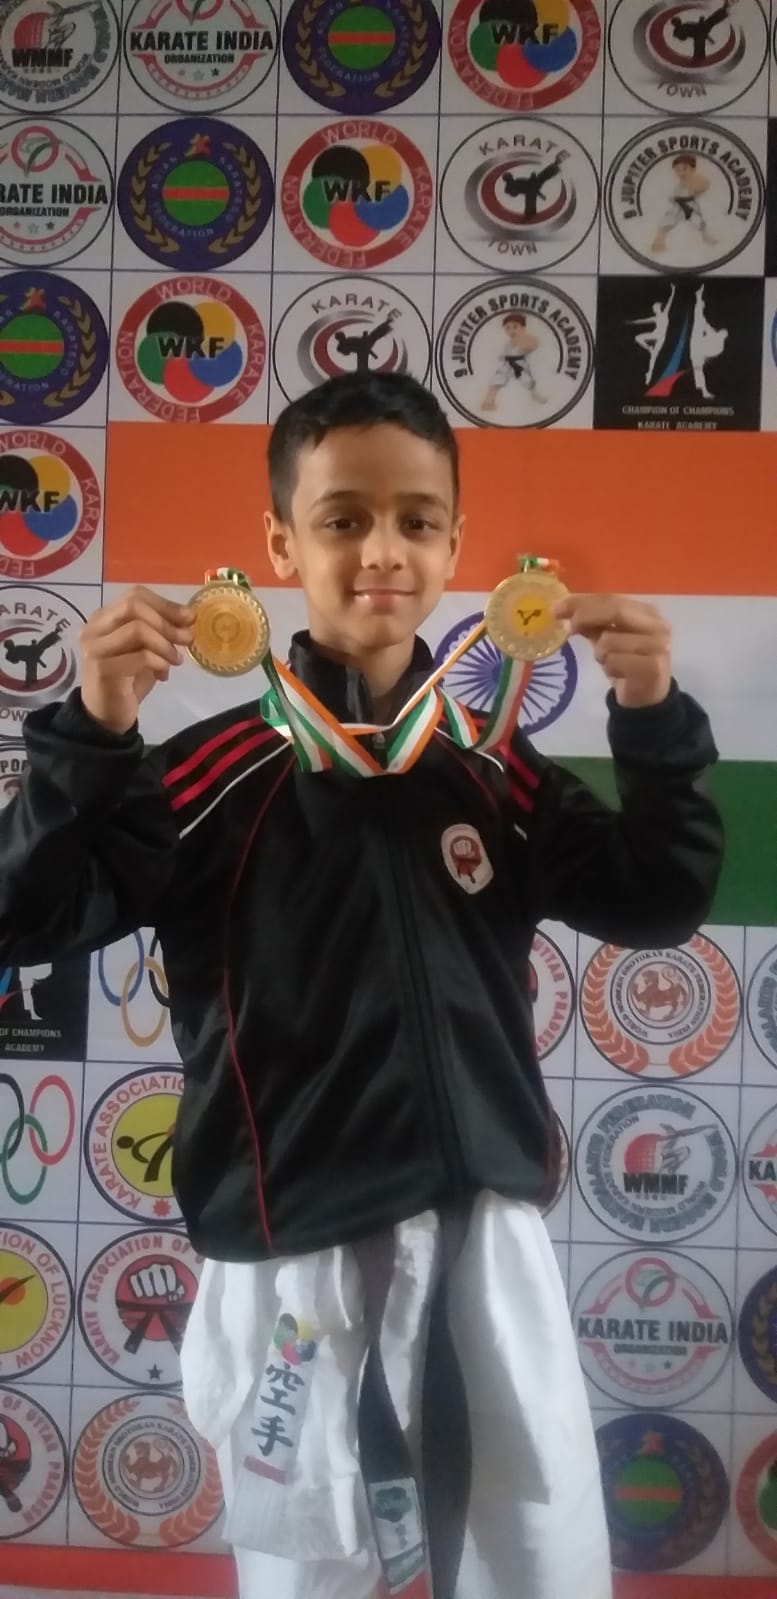 We are proud to announce that Rudra Ahuja of Grade III has won two gold medals in 2nd World Modern Shotokan District Karate Championship